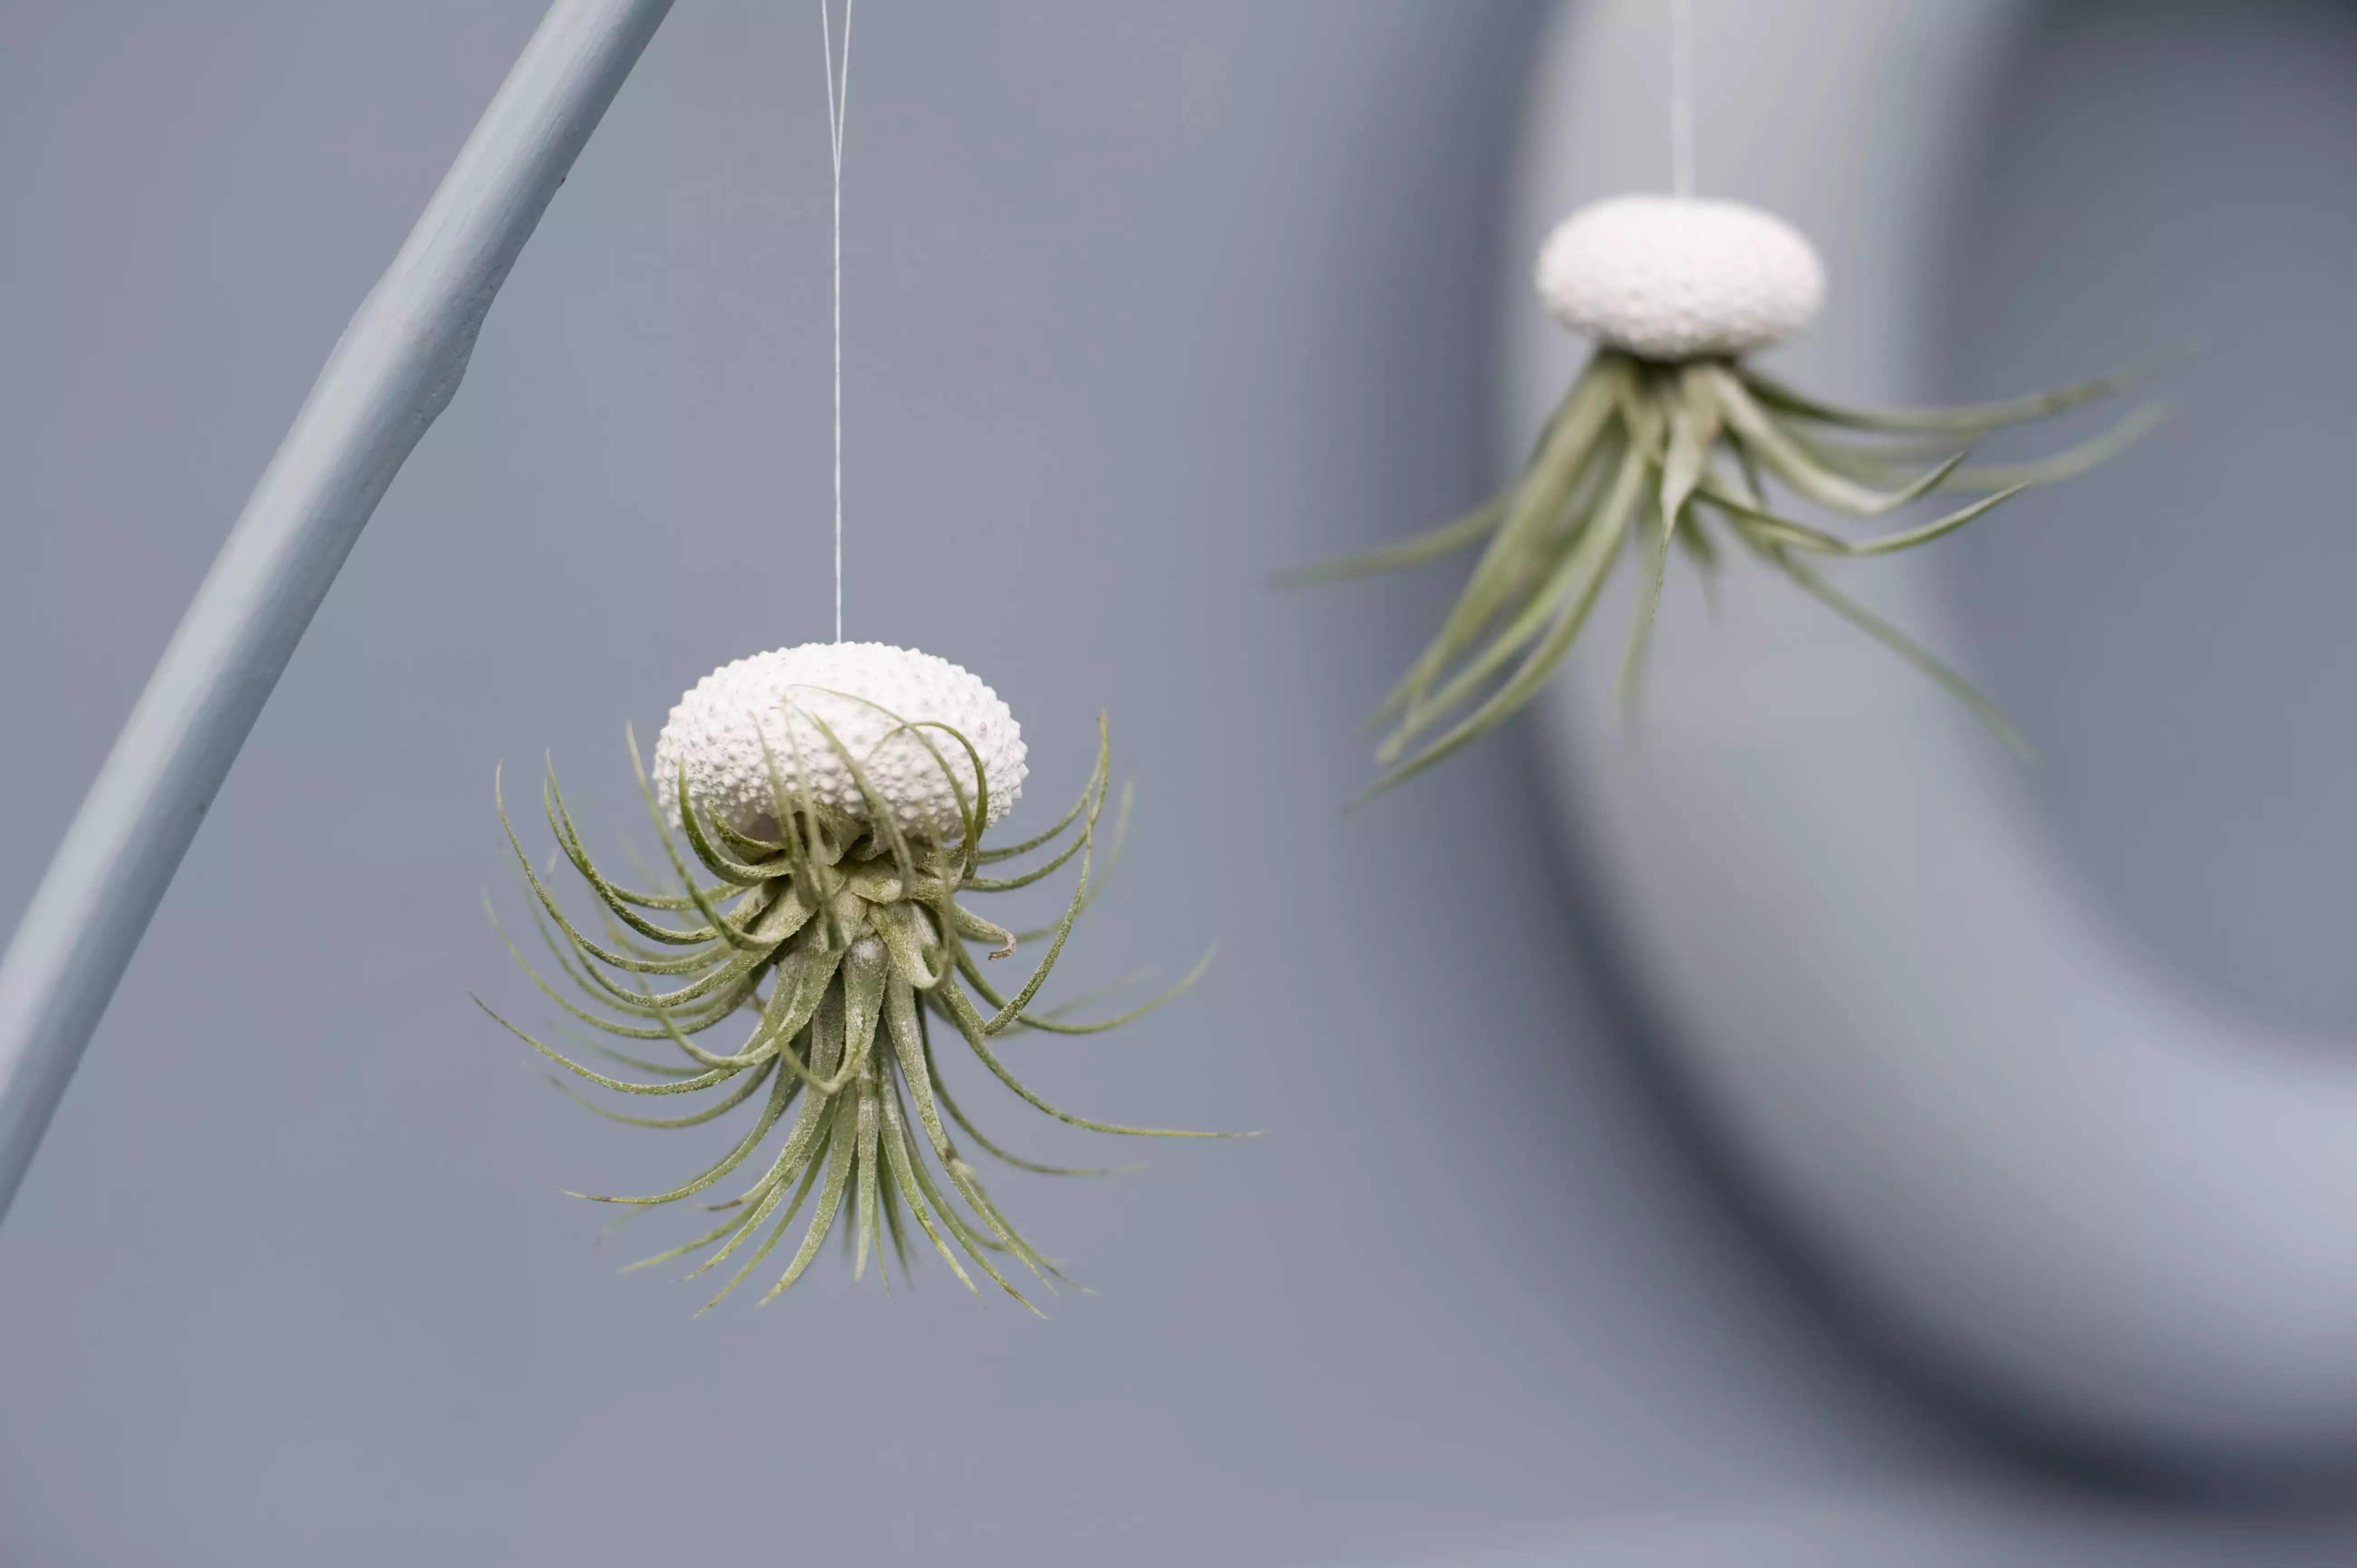 Air plants planted in sea urchin shells